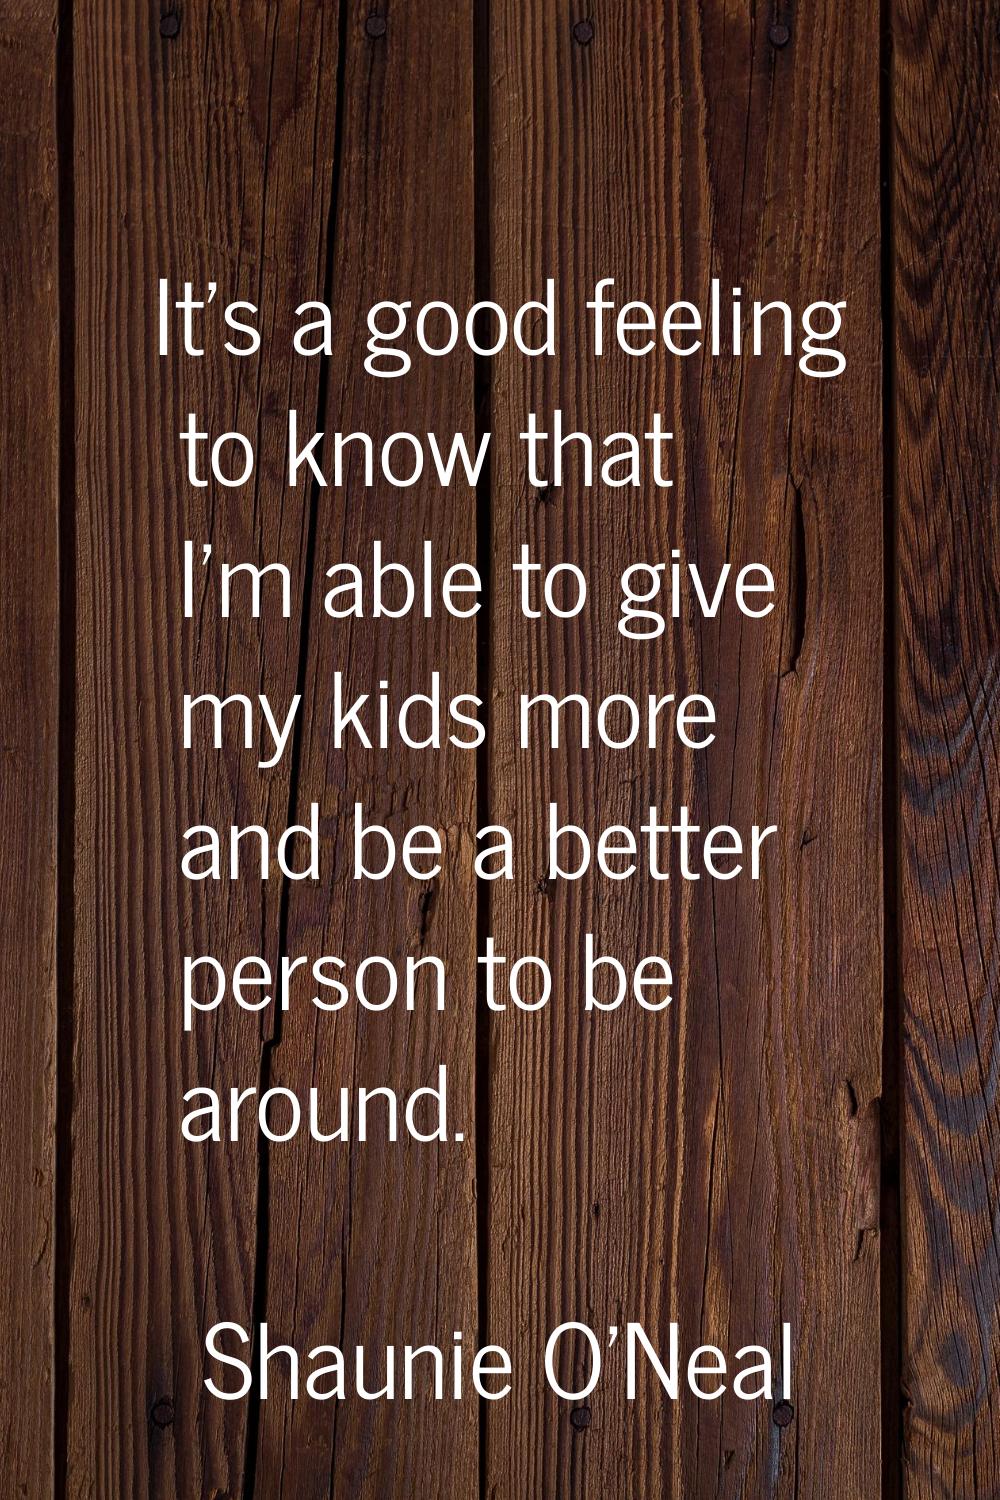 It's a good feeling to know that I'm able to give my kids more and be a better person to be around.